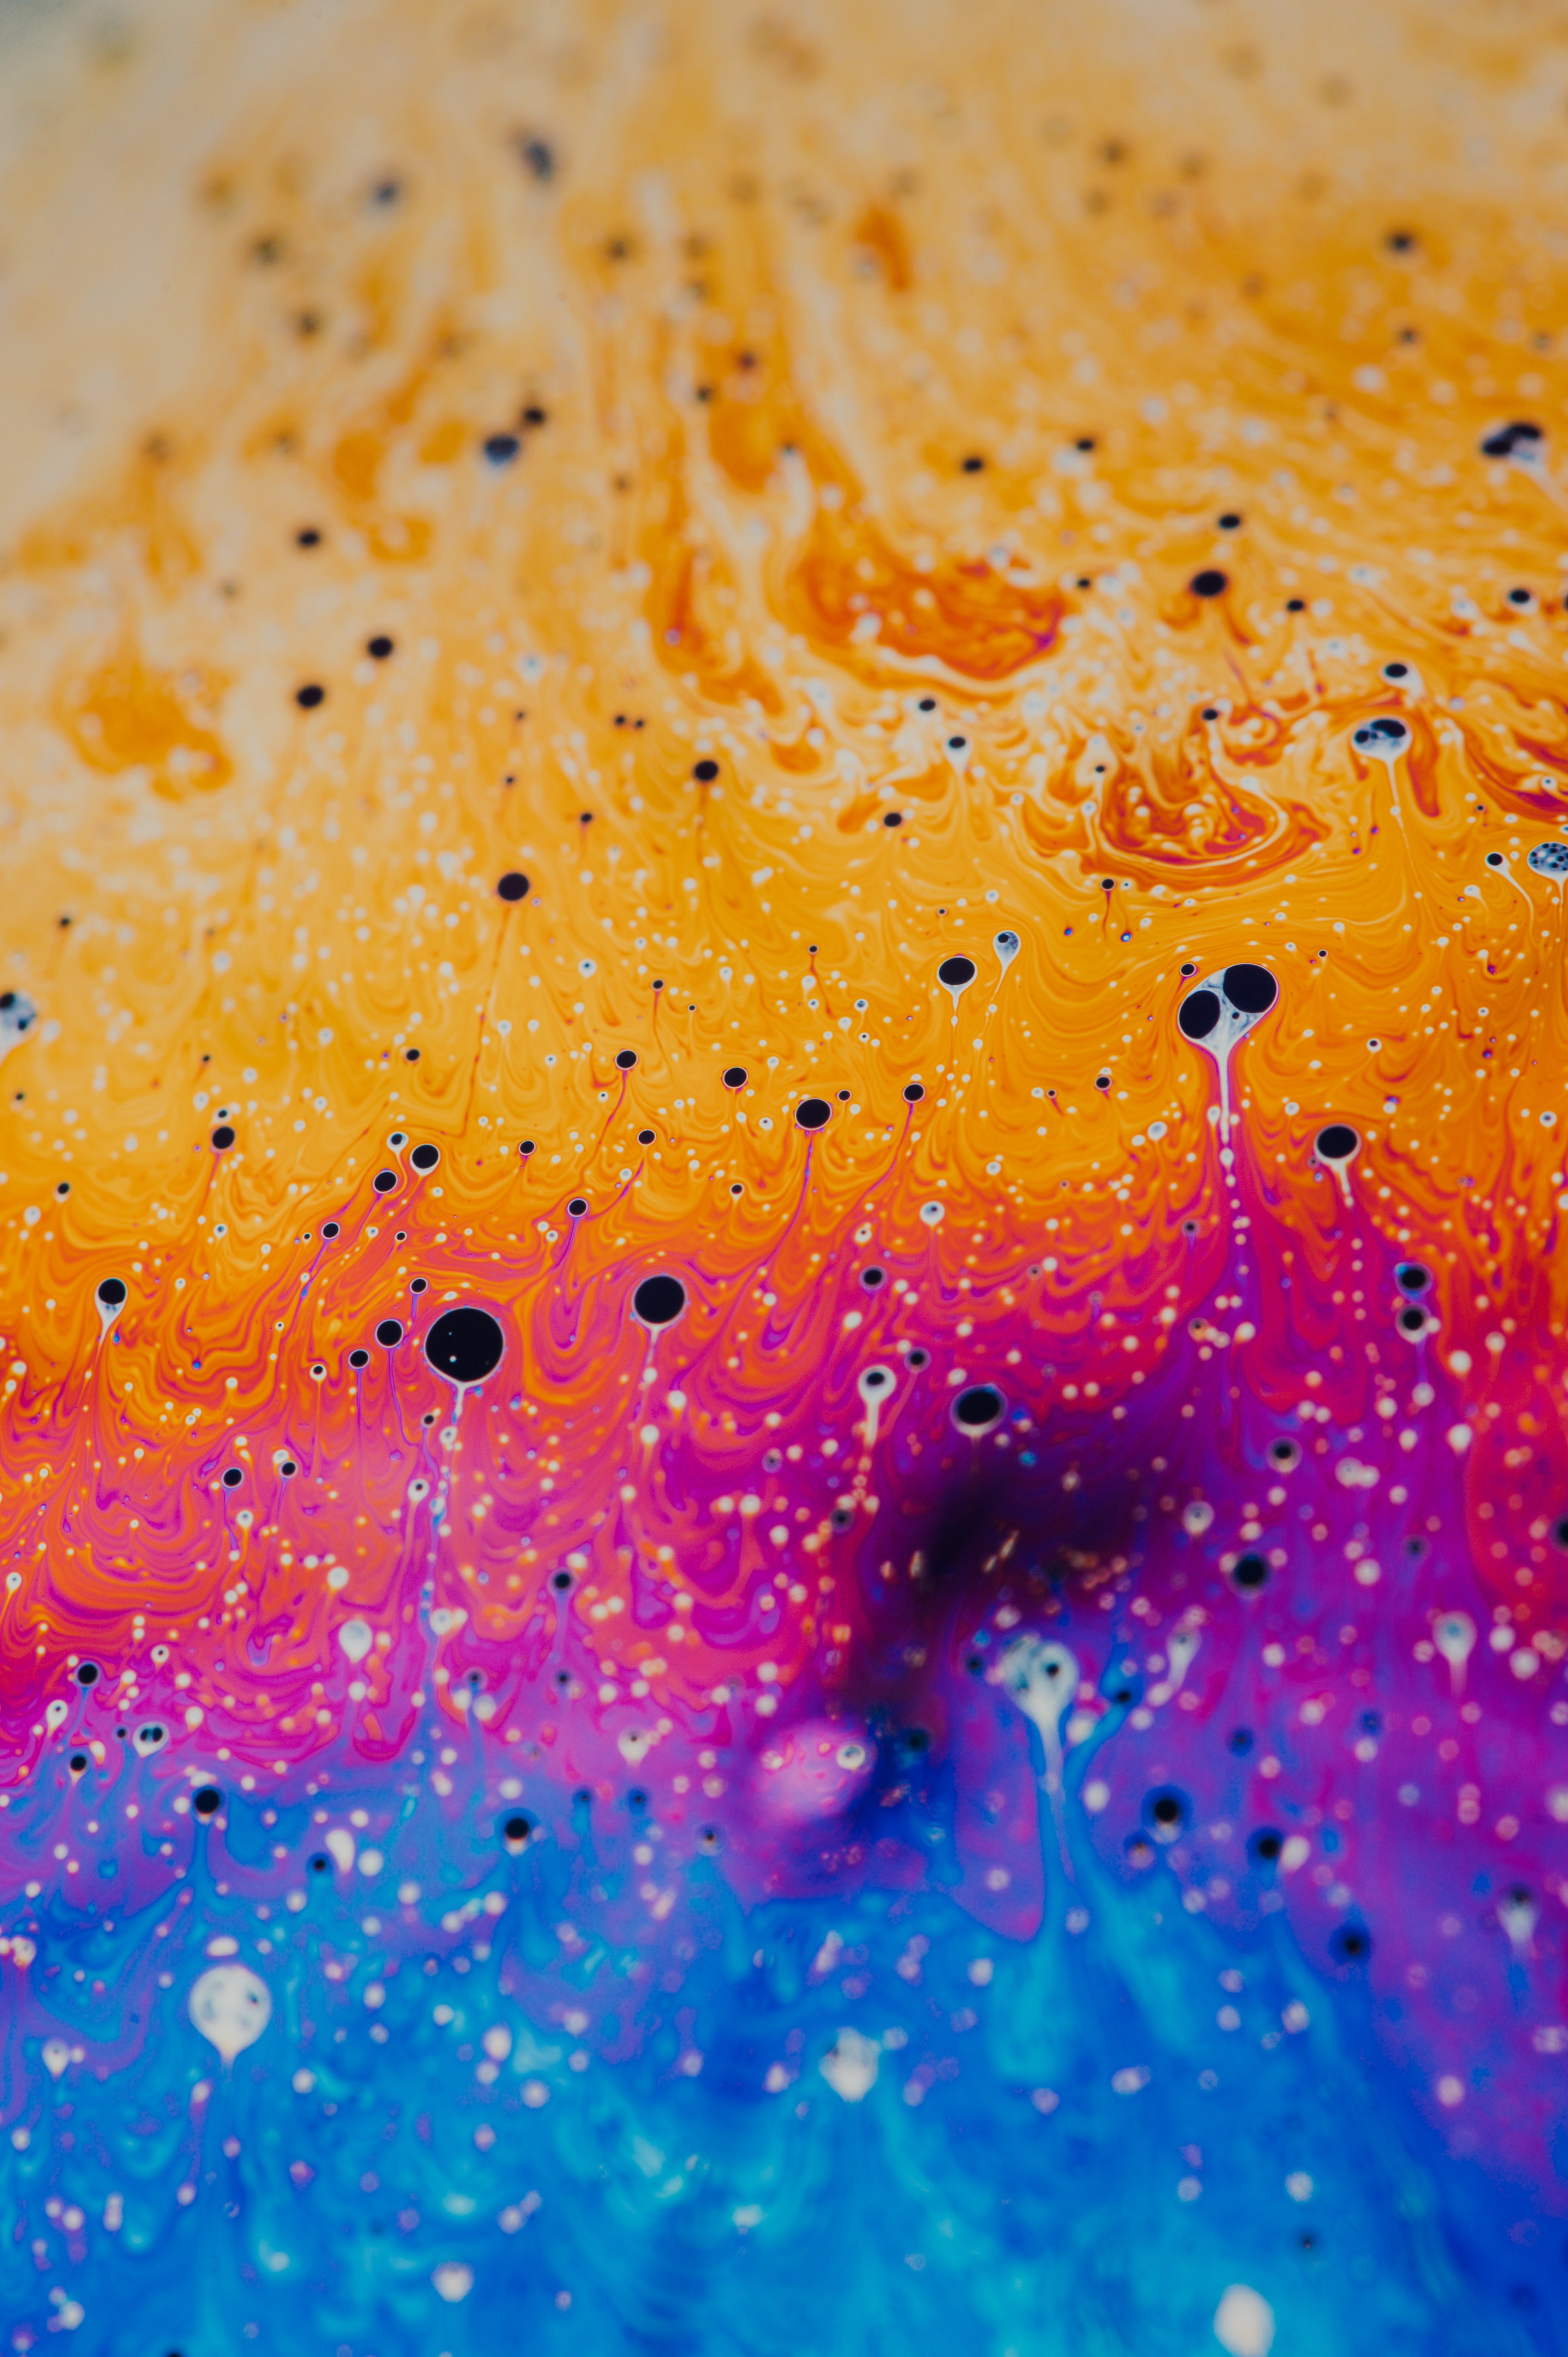 motley, multicolored, stains, paint collection of HD images